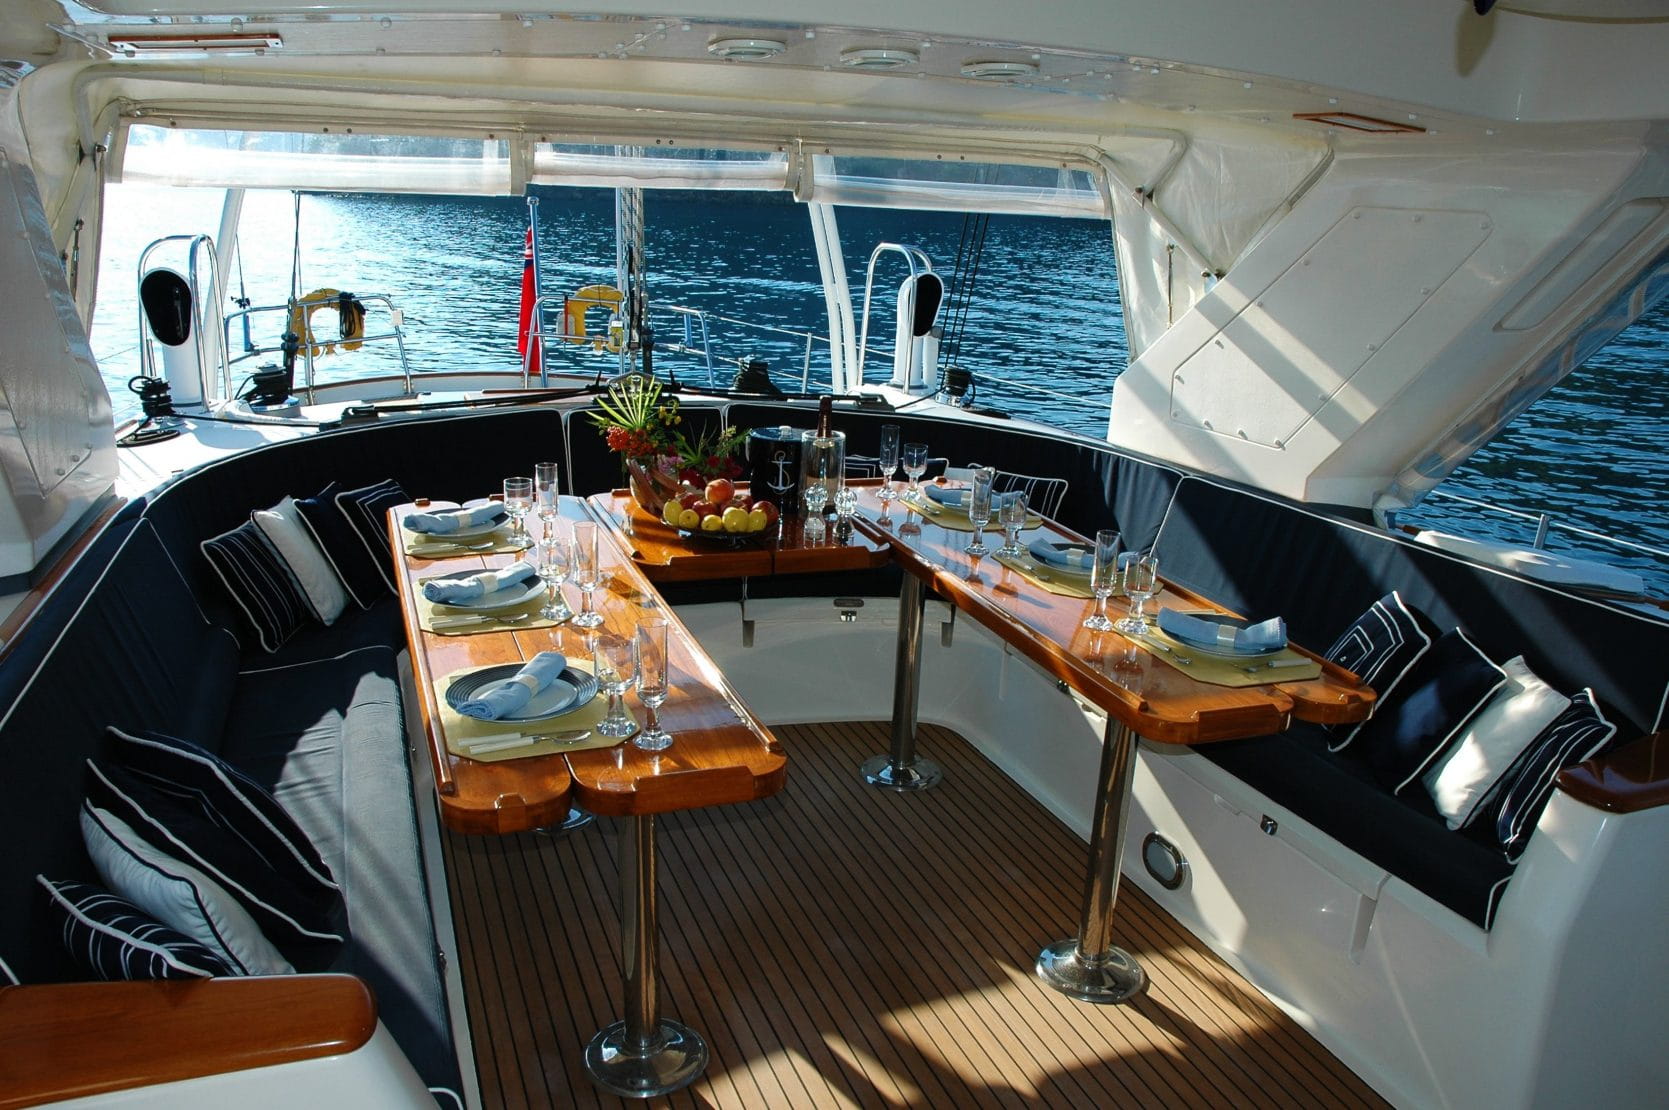 View of the inside of a yacht.